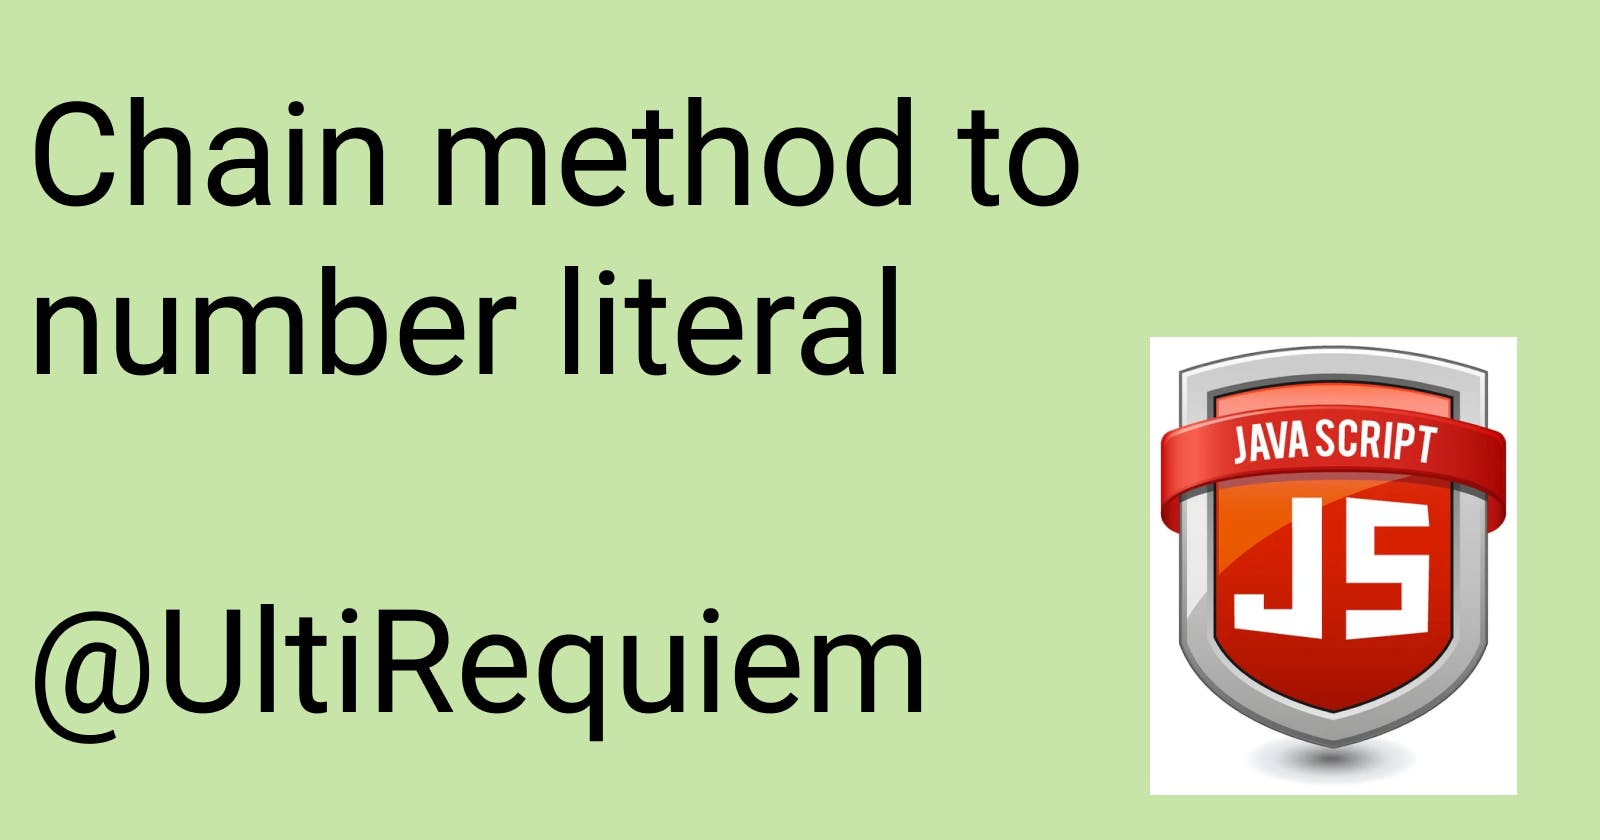 How to chain a method to a number literal